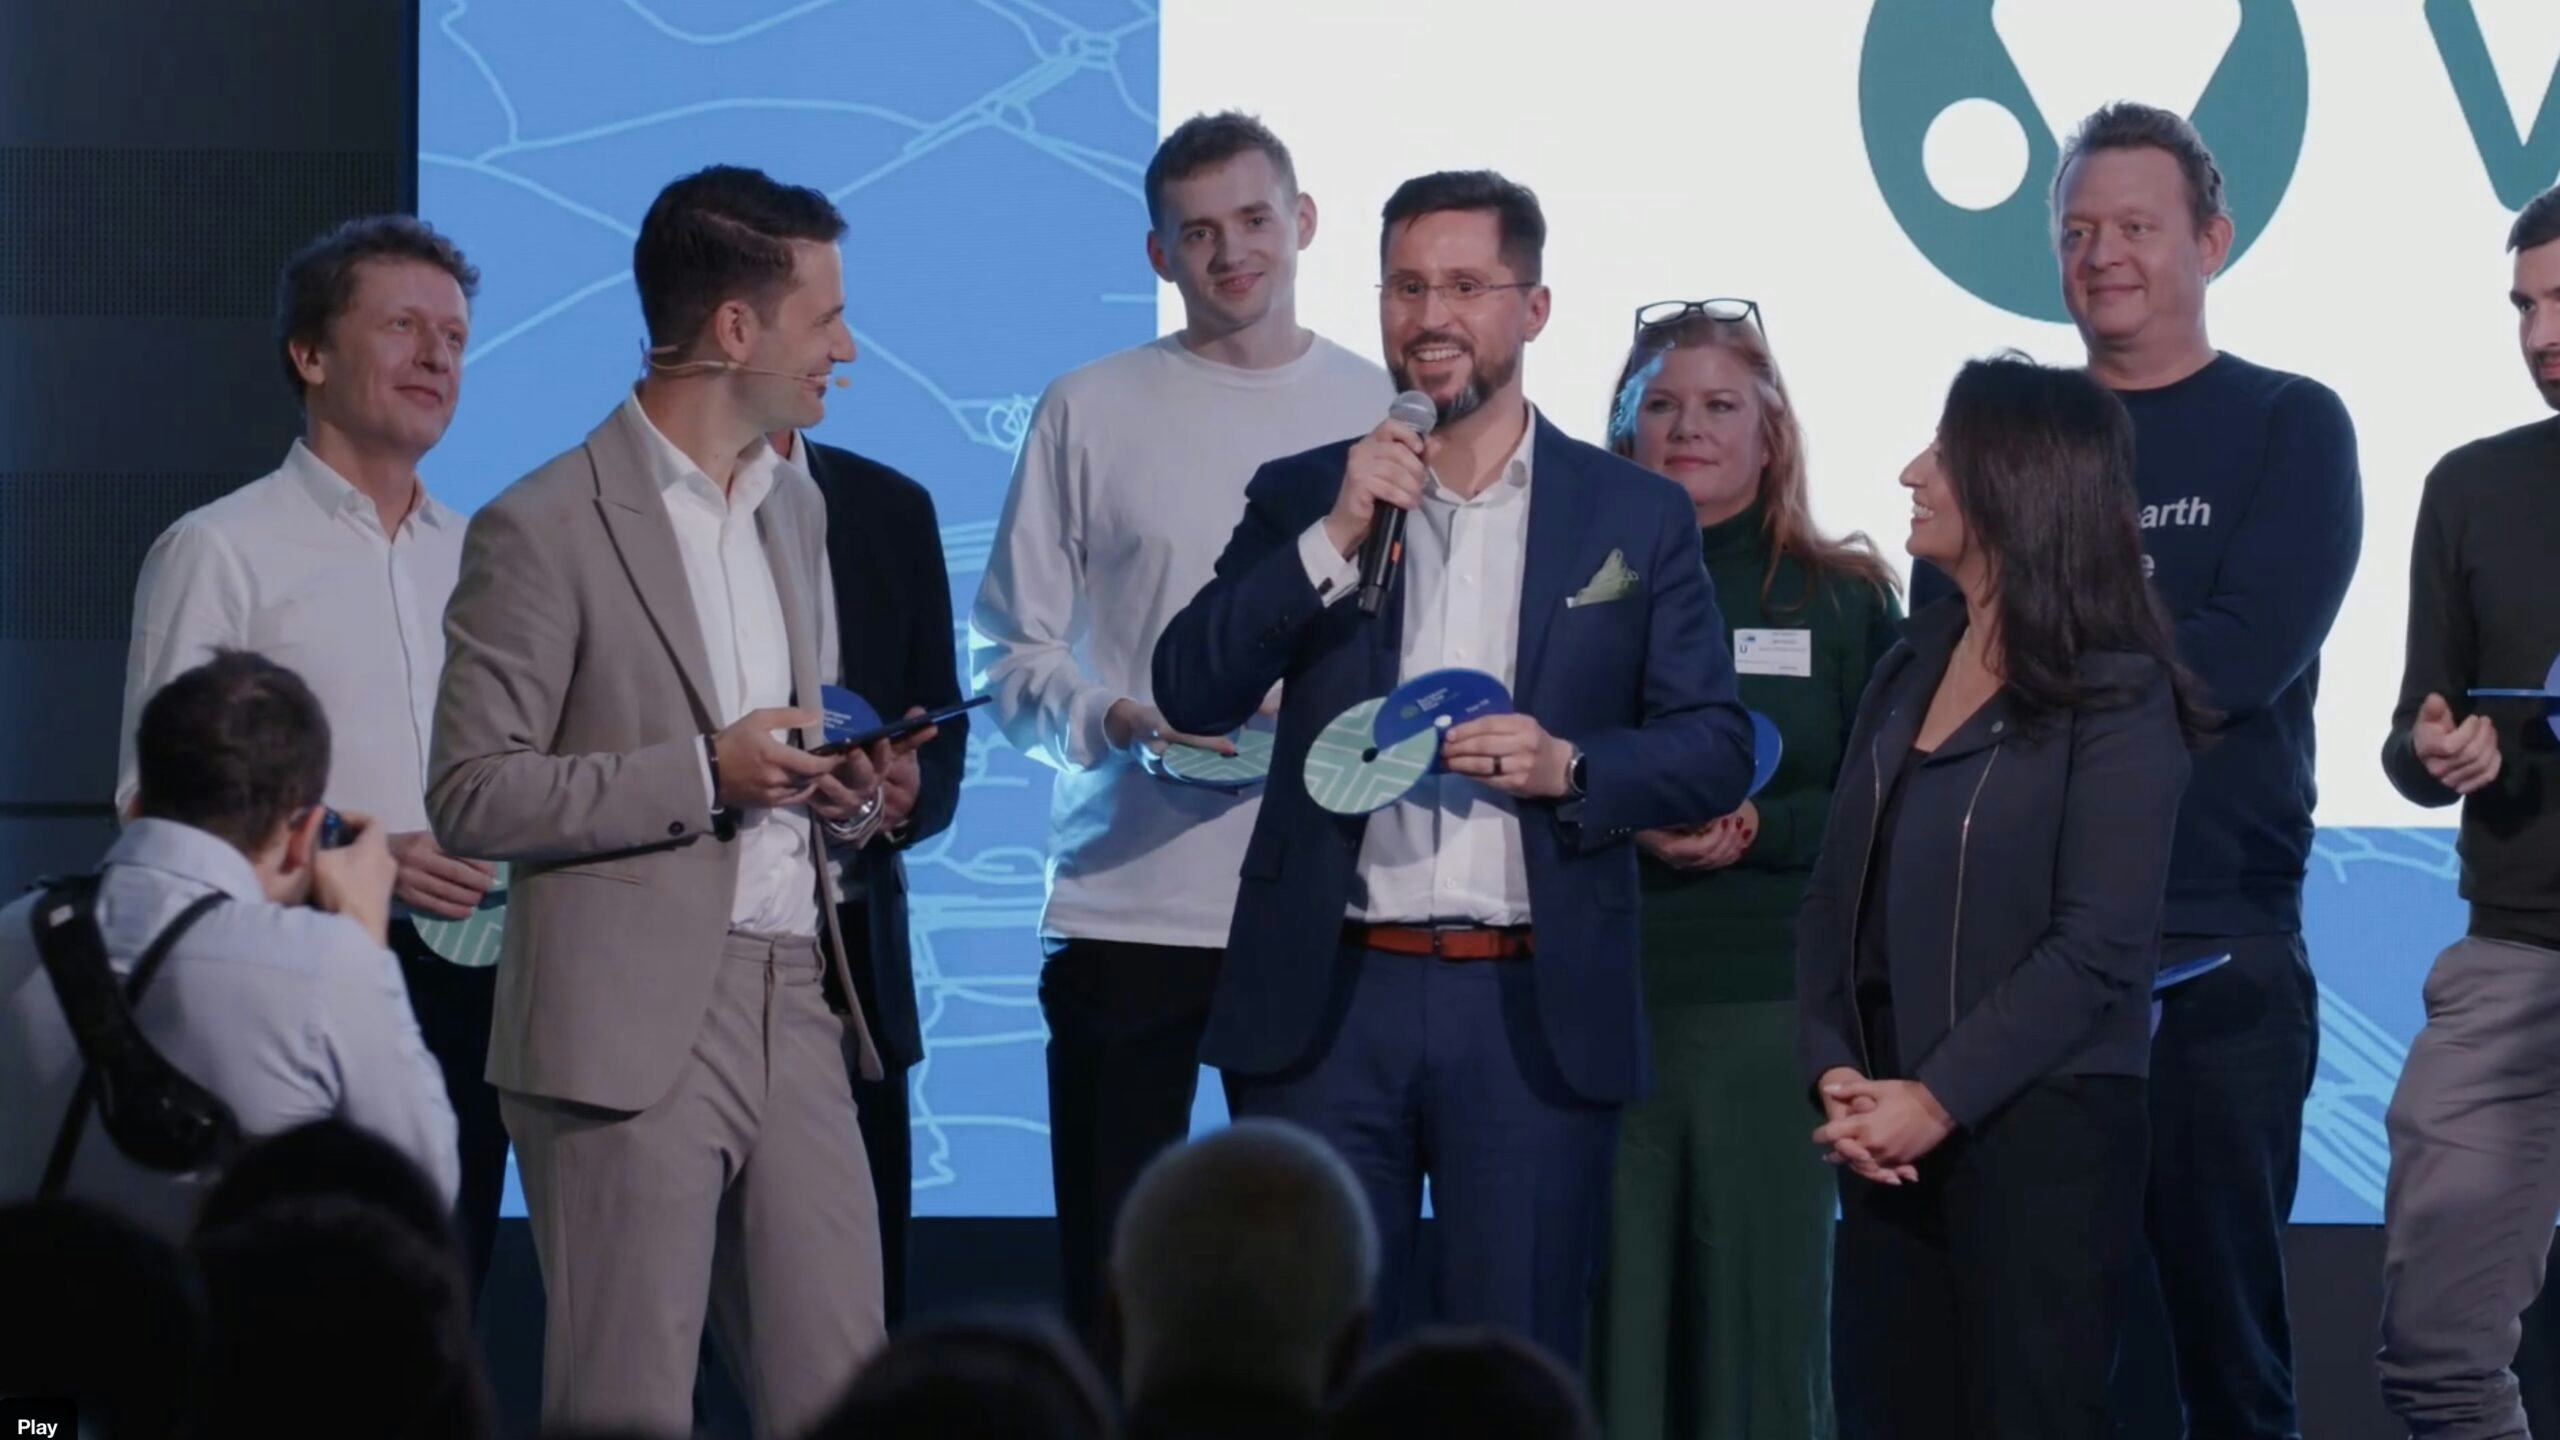 Vapaus founder Mikko Ampuja, who started the company in 2018 took to the stage to claim the gold award at the ceremony in October. – Photo Vapaus